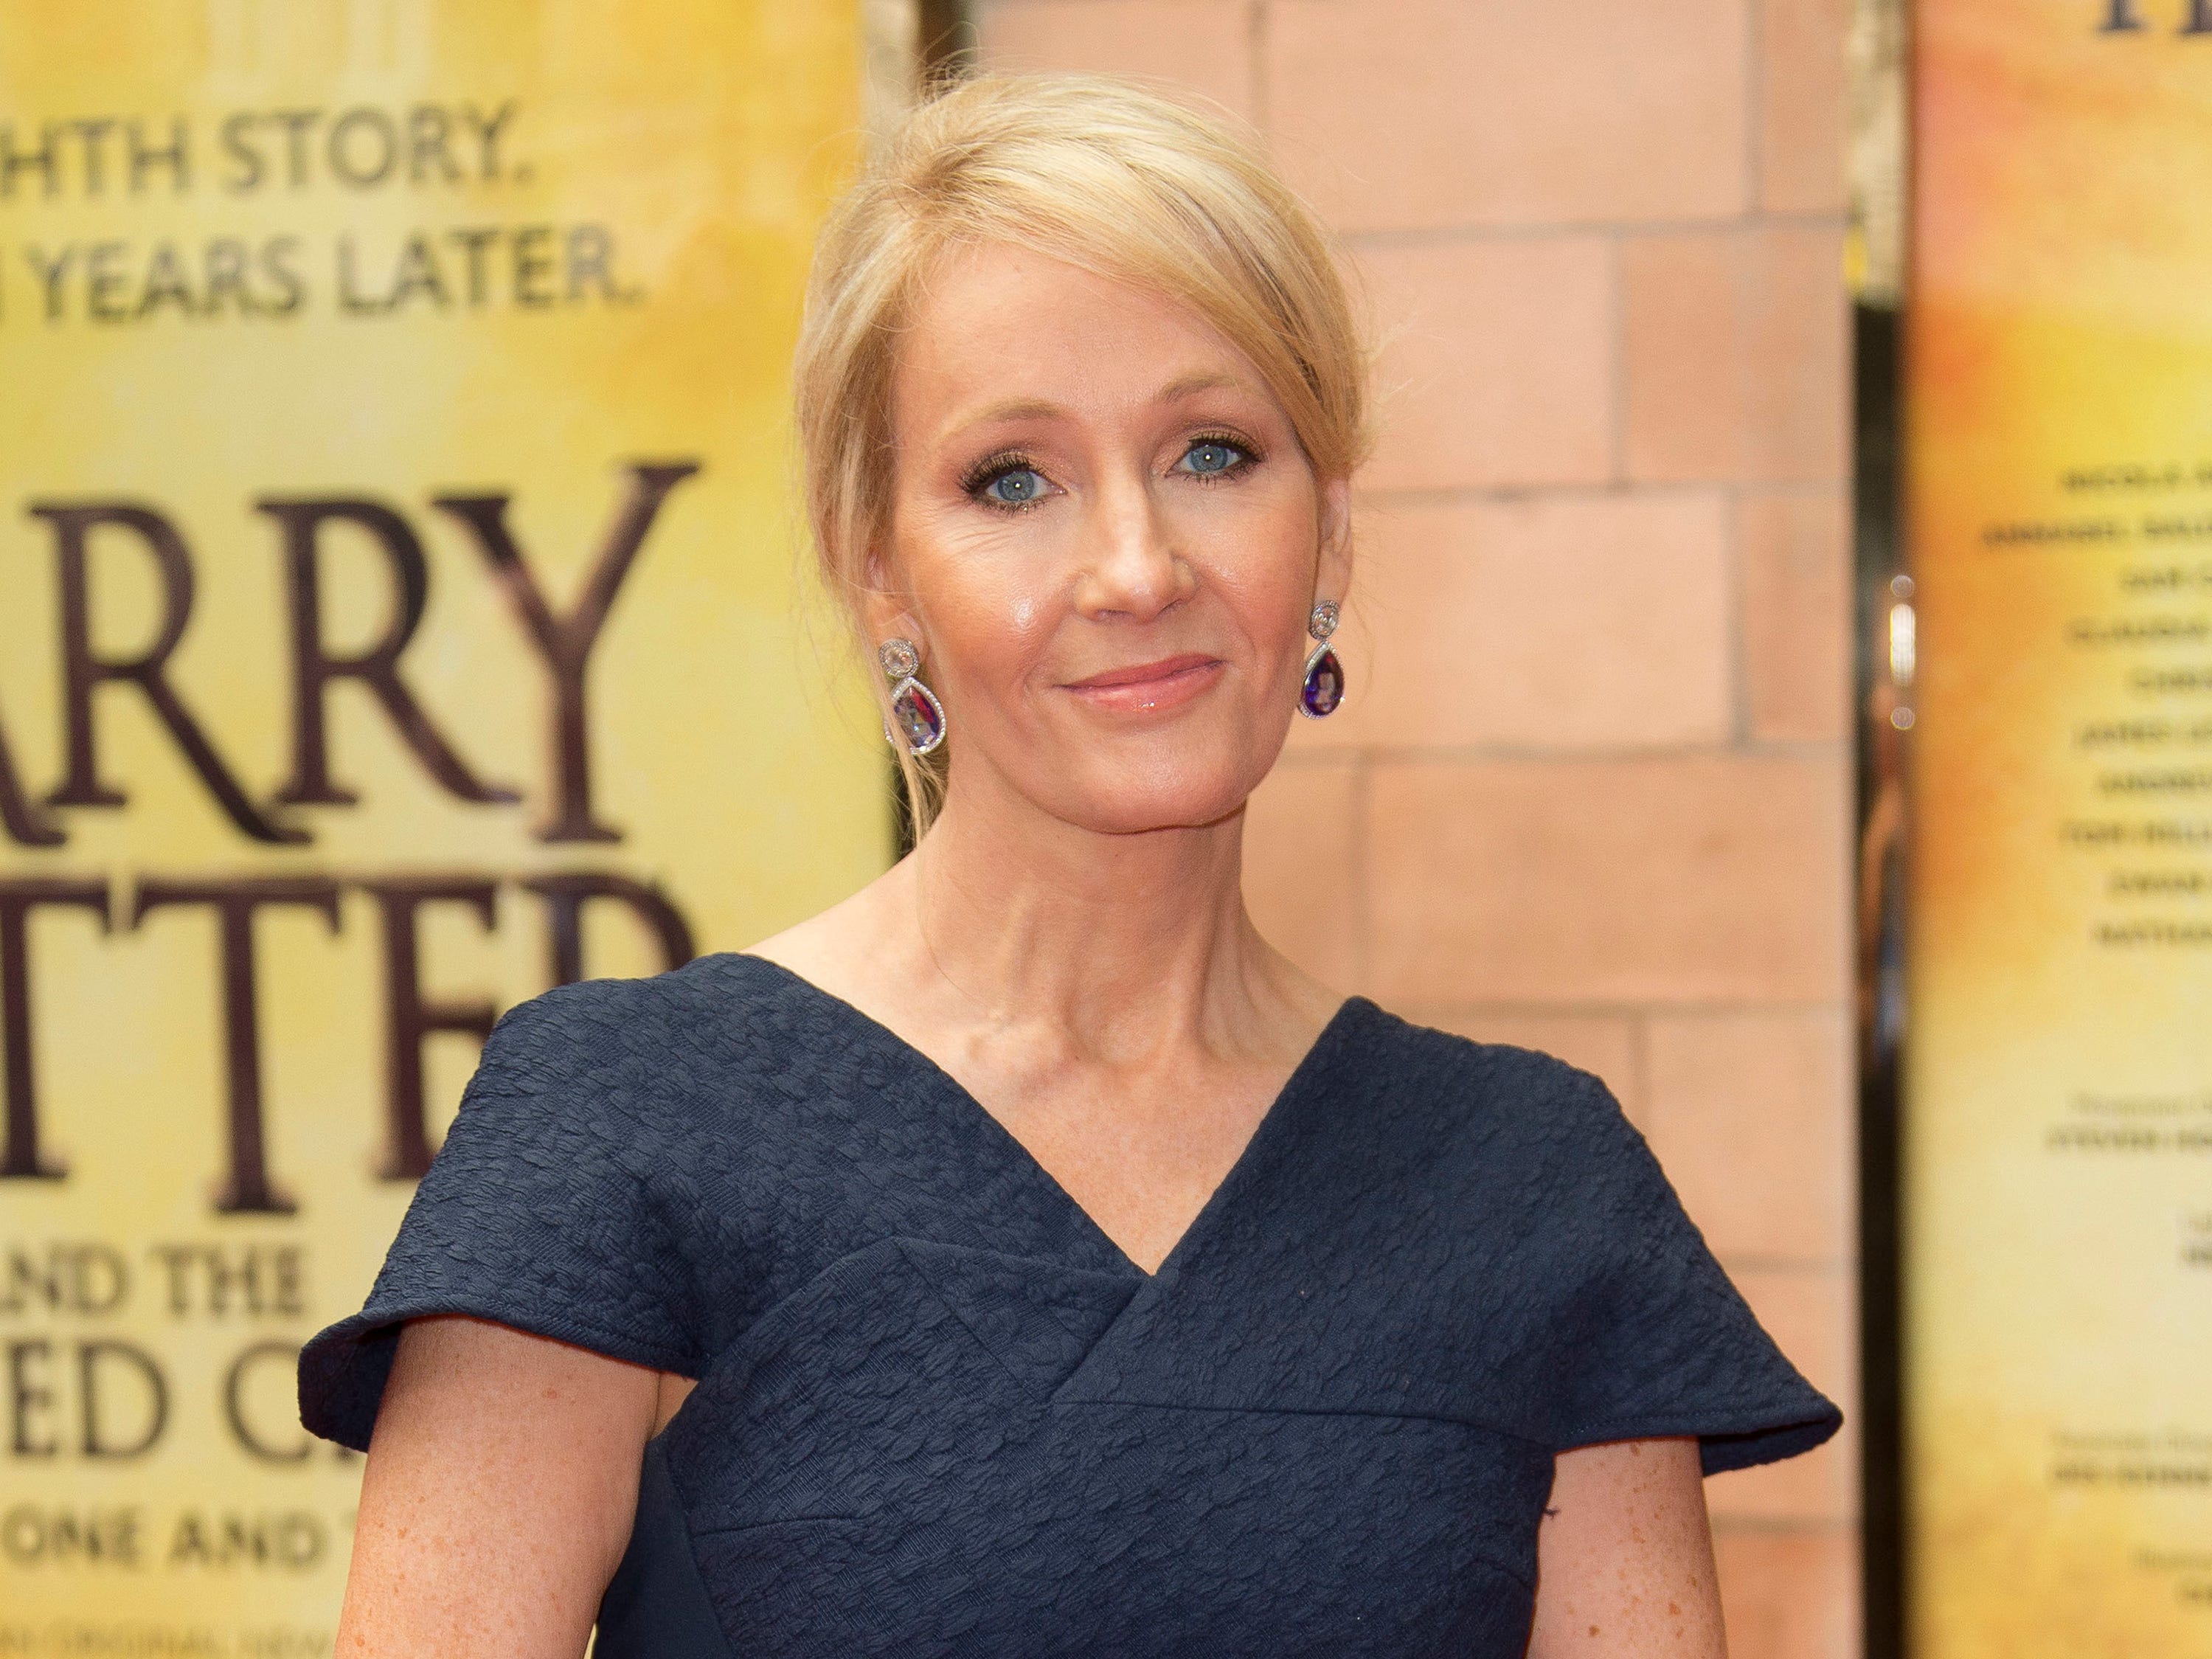 agustin orozco recommends jk rowling sex ed pic